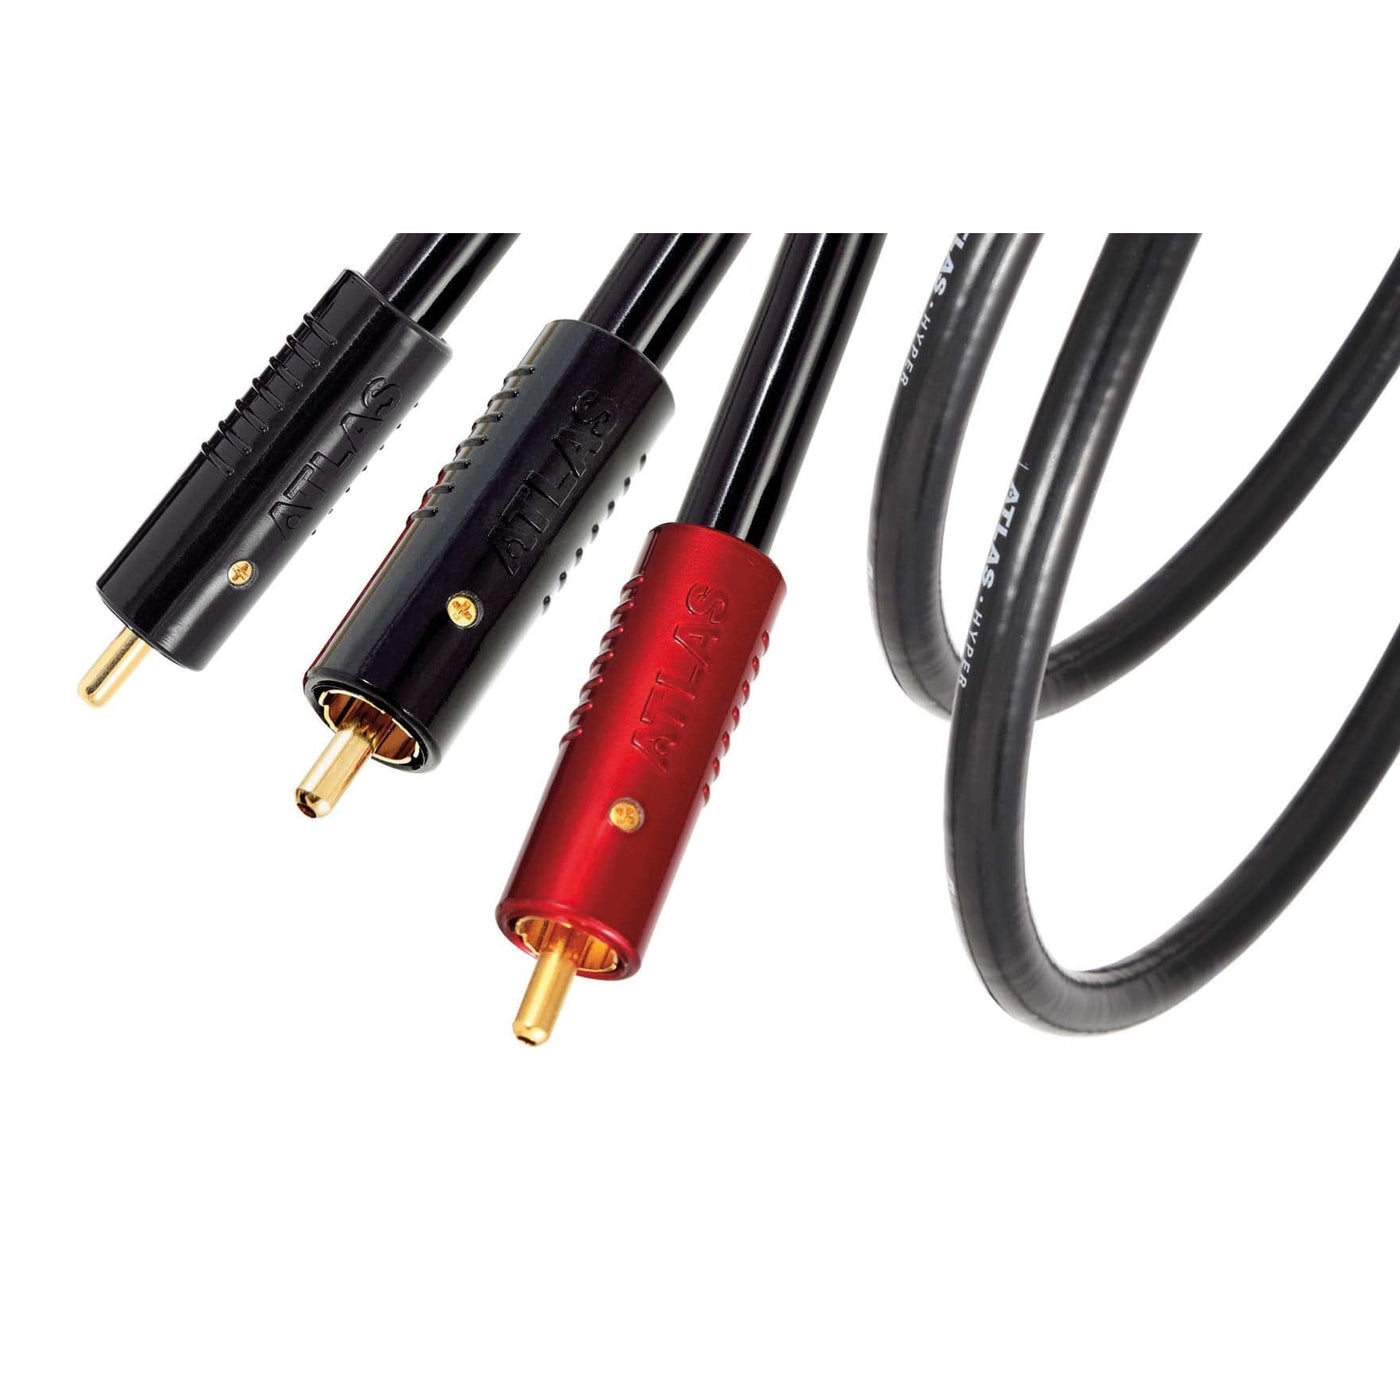 Atlas Hyper Achromatic Subwoofer RCA 1:2 Cable at Audio Influence